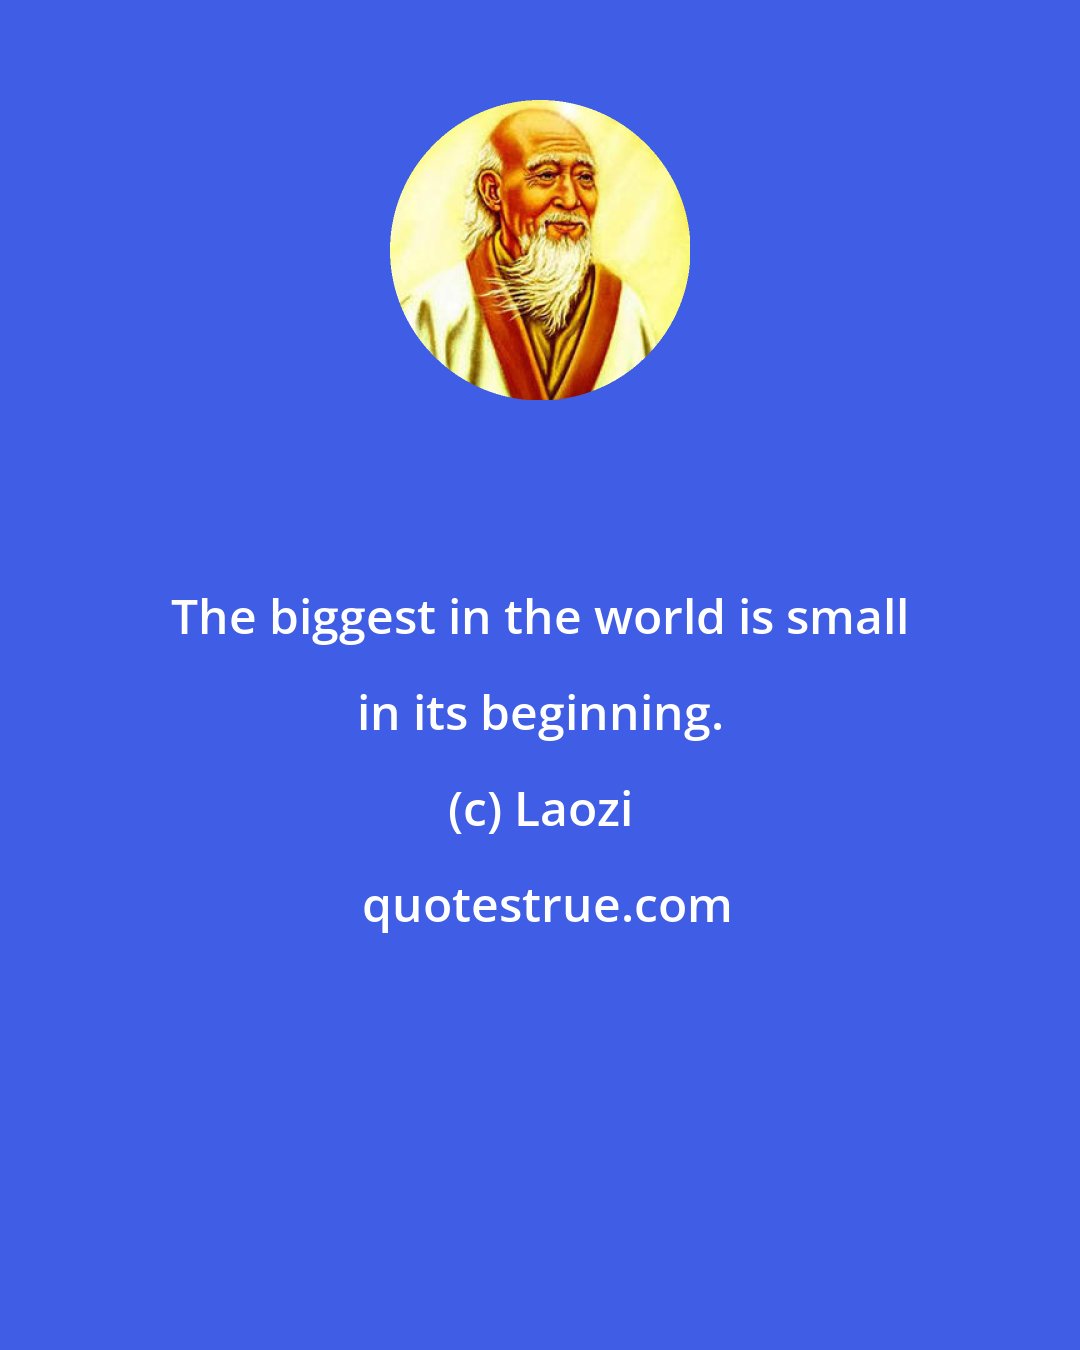 Laozi: The biggest in the world is small in its beginning.